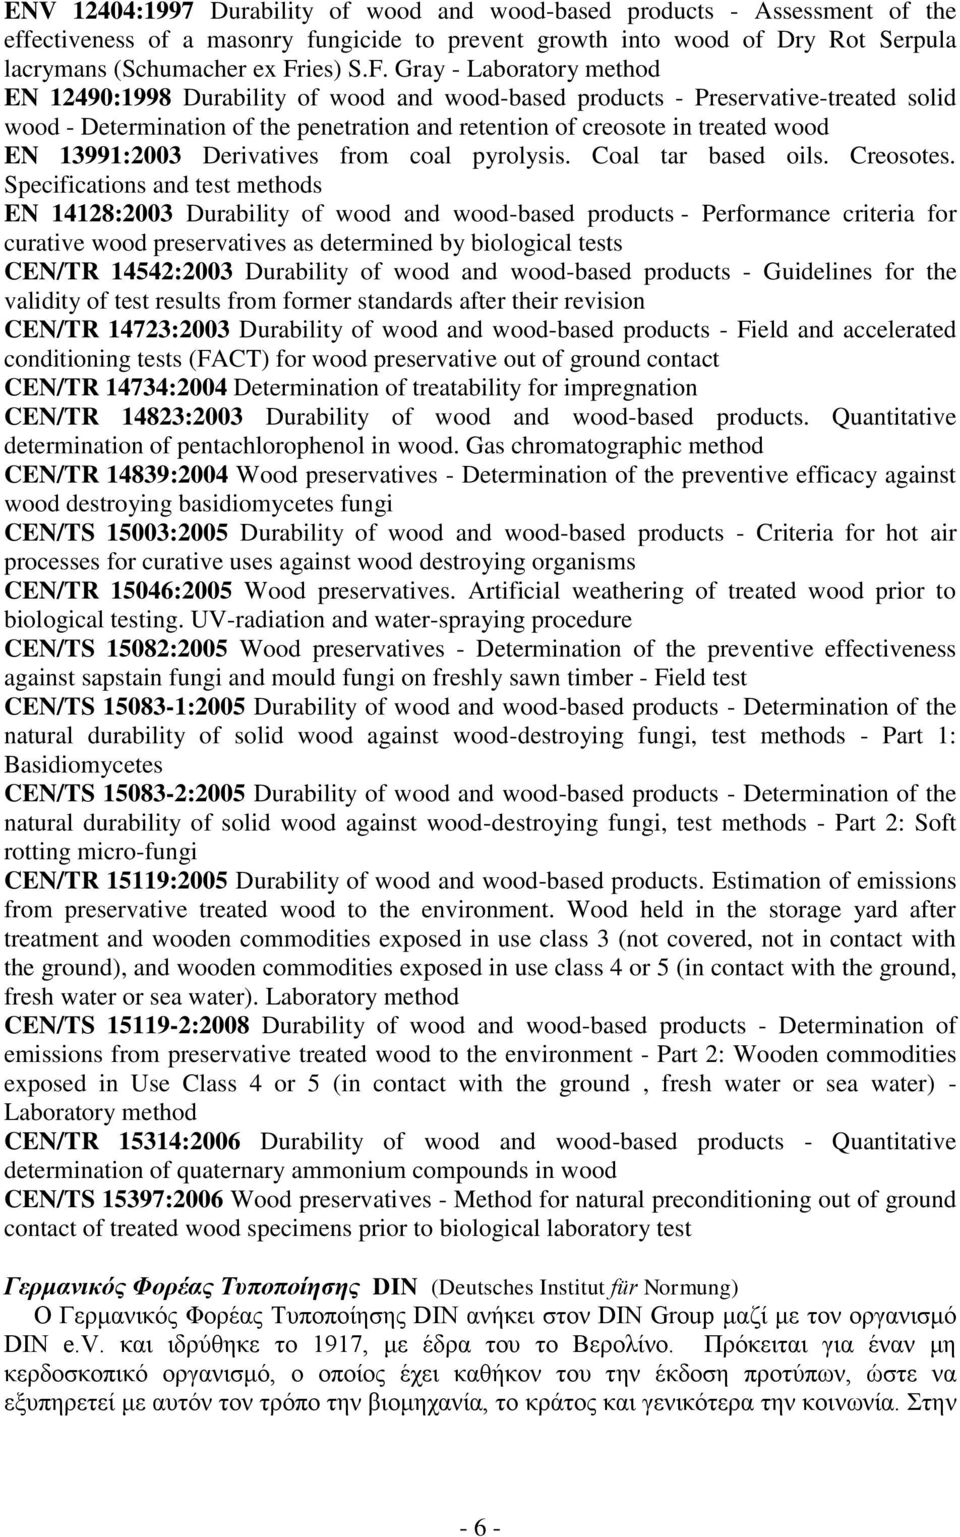 Gray - Laboratory method EN 12490:1998 Durability of wood and wood-based products - Preservative-treated solid wood - Determination of the penetration and retention of creosote in treated wood EN